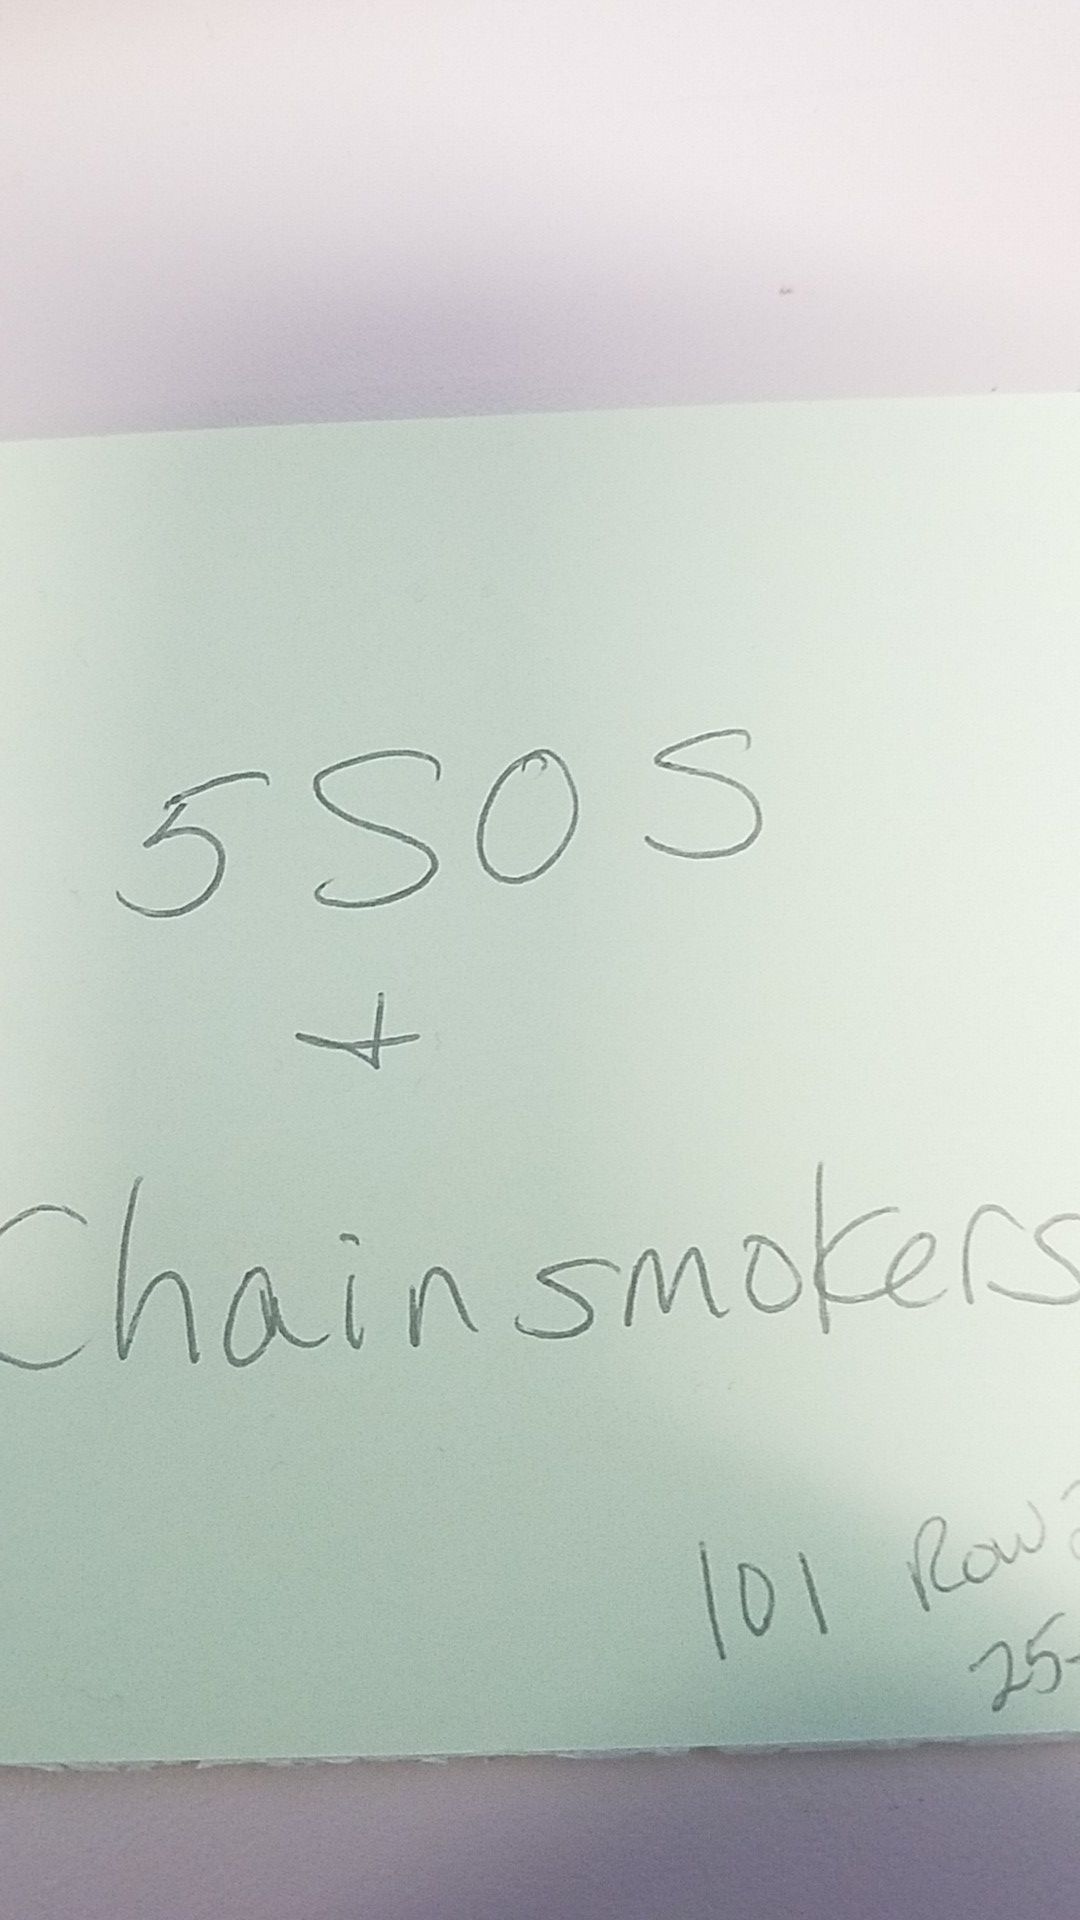 5 SOS and Chainsmokers Tickets